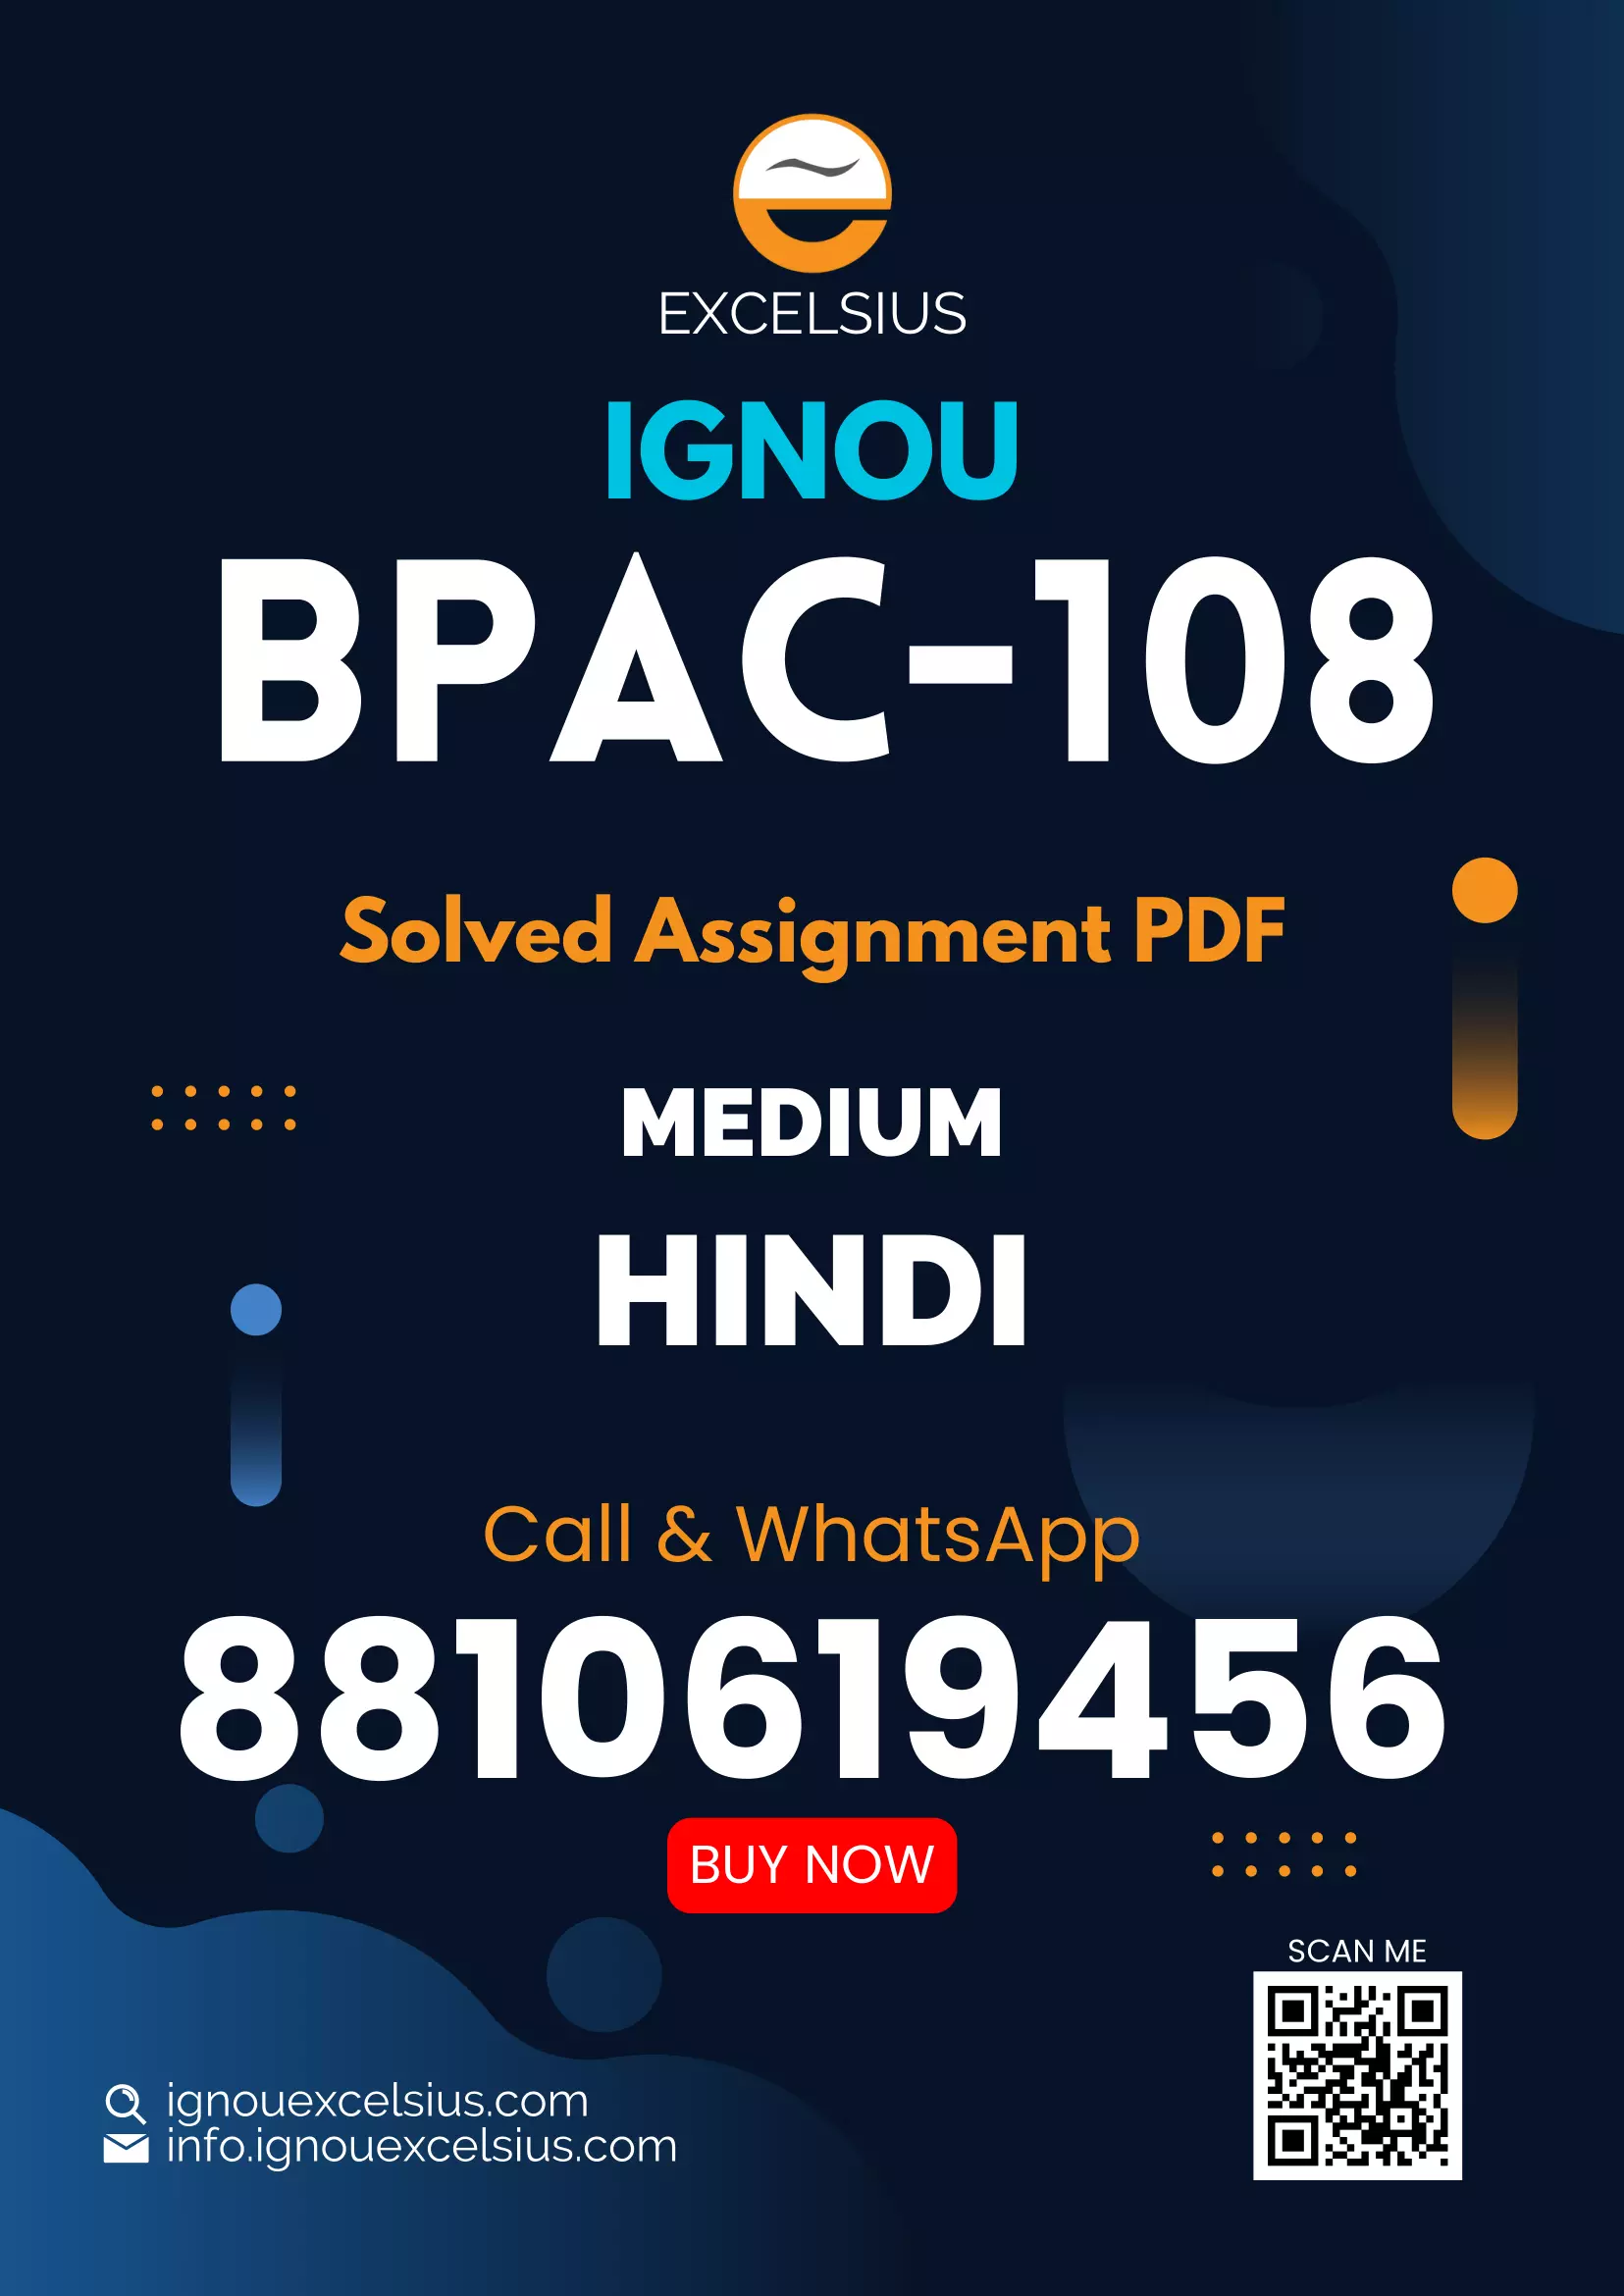 IGNOU BPAC-108 - Public Policy and Administration in India, Latest Solved Assignment-July 2022 – January 2023